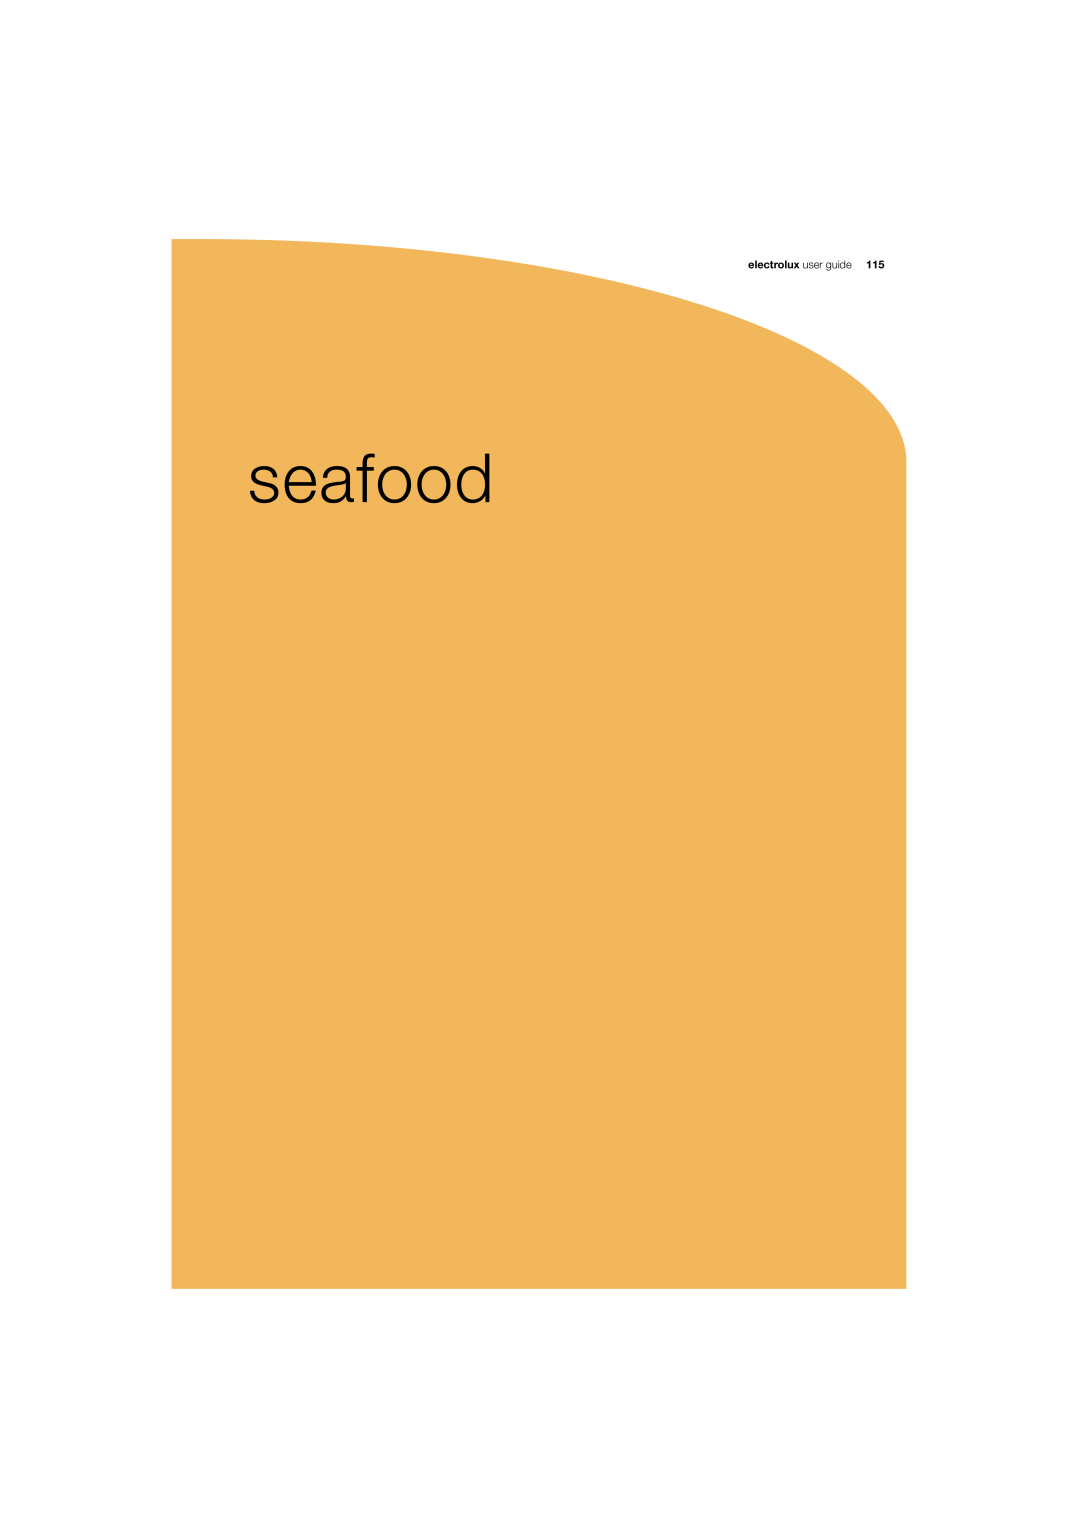 Electrolux 180 manual seafood, electrolux user guide 